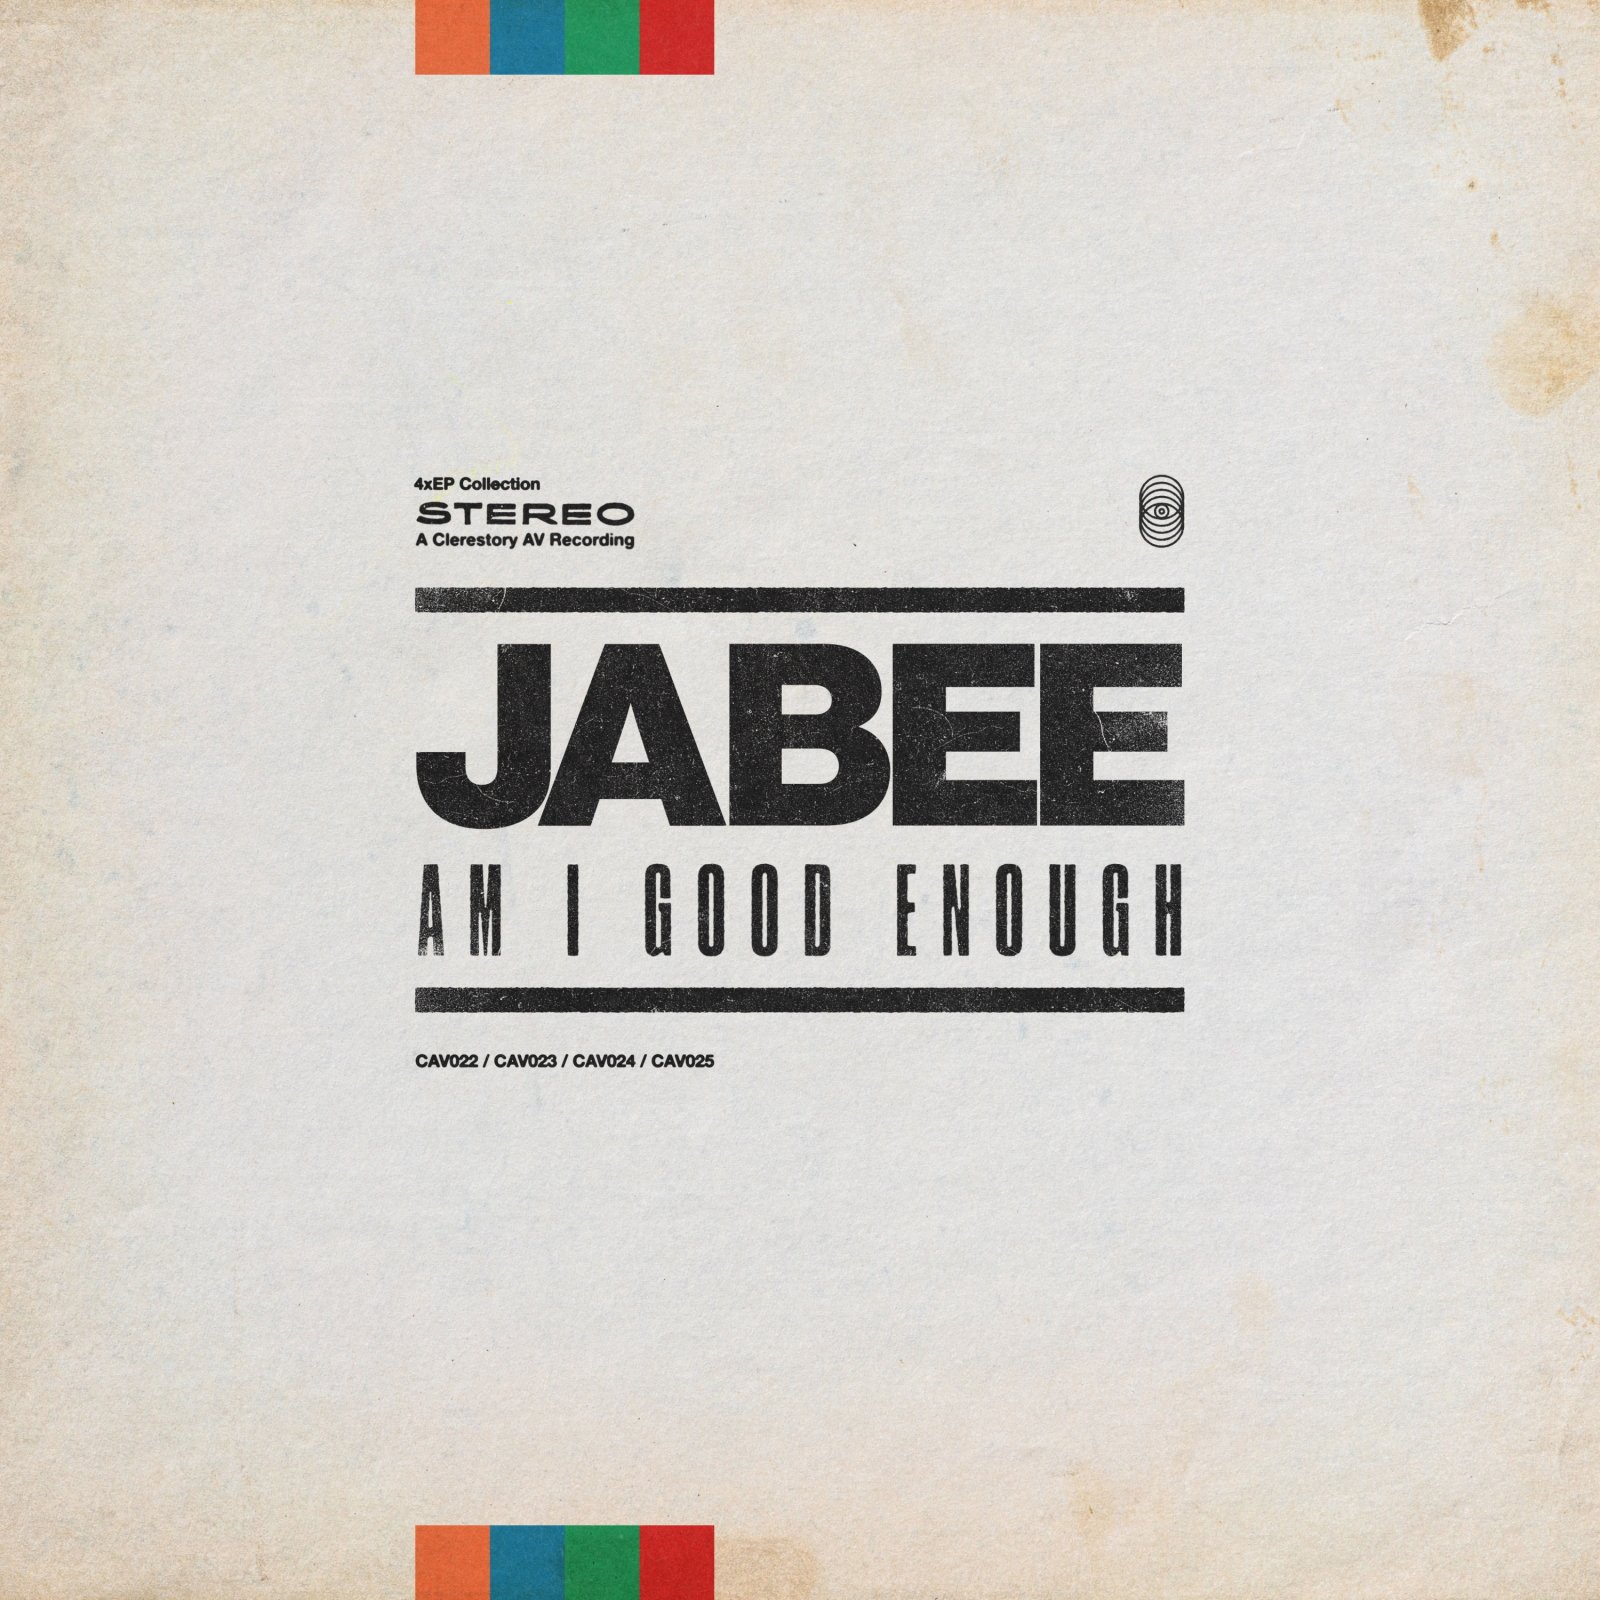 JABEE AM I GOOD ENOUGH 1600x1600 smaller online use copy.jpg